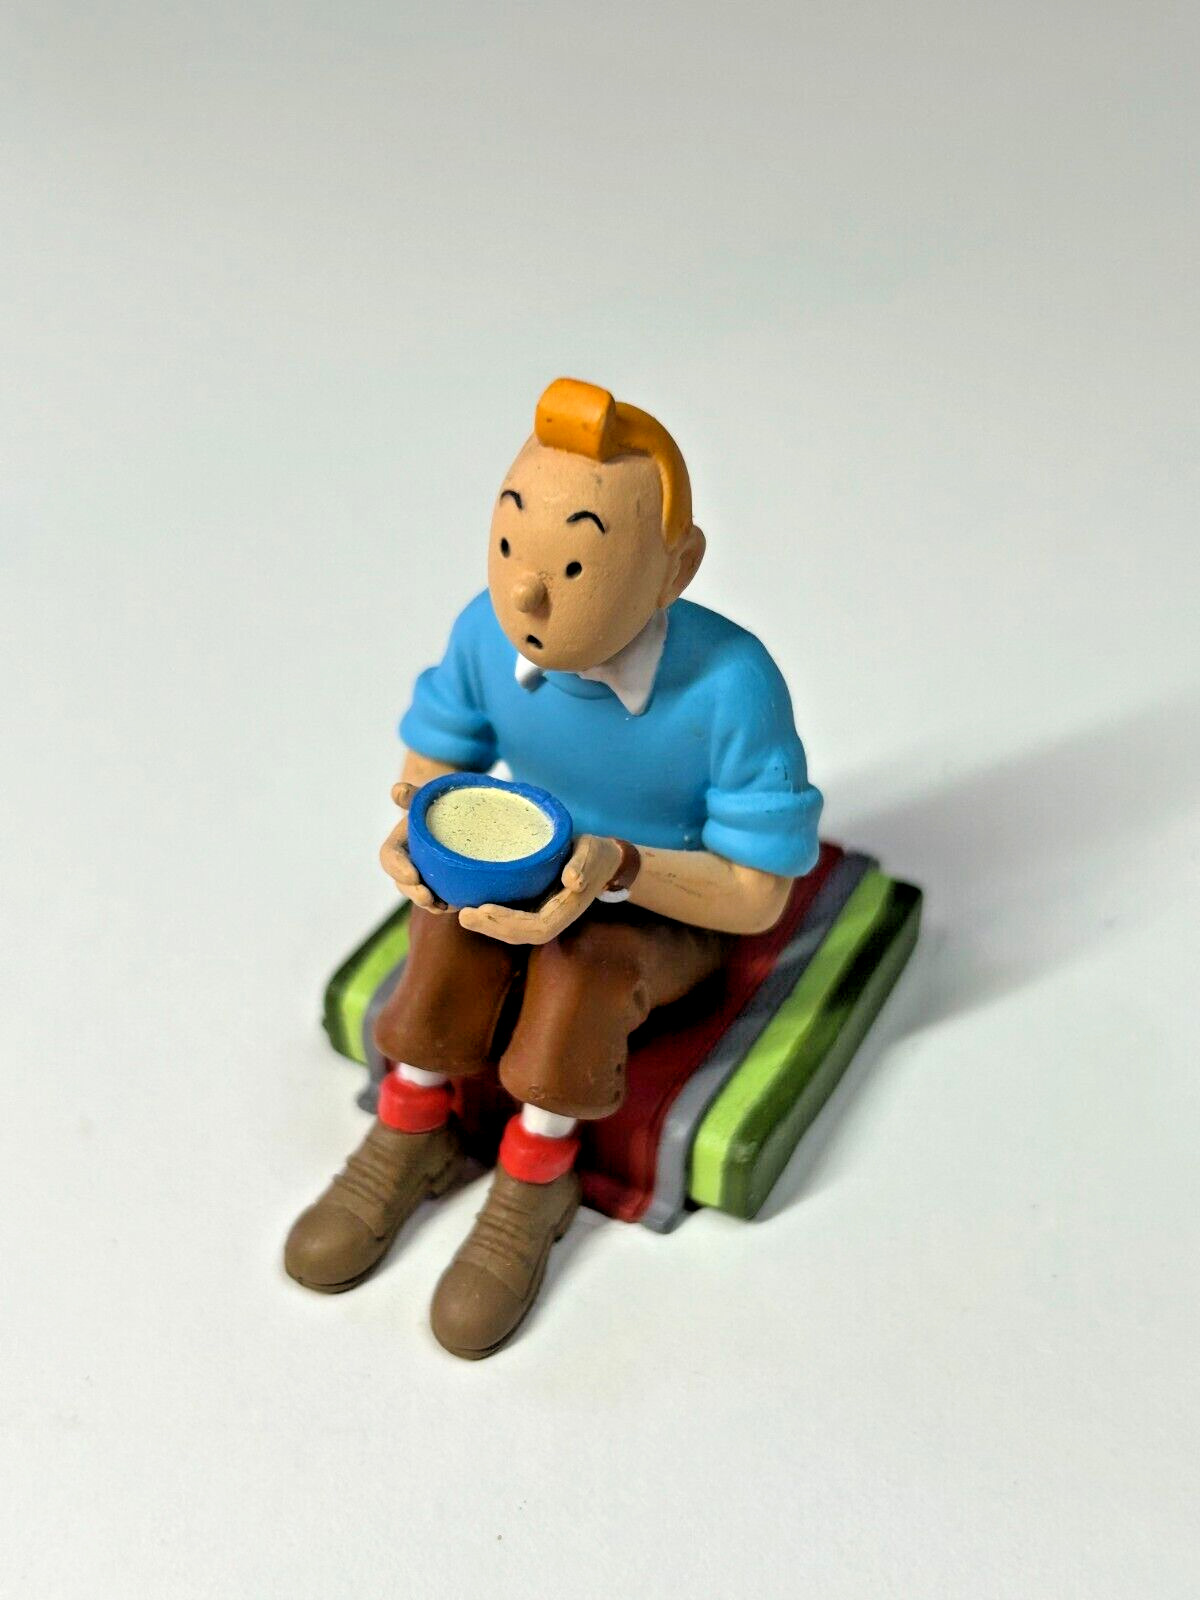 Tintin sitting with bowl figurine - Rare and out of production